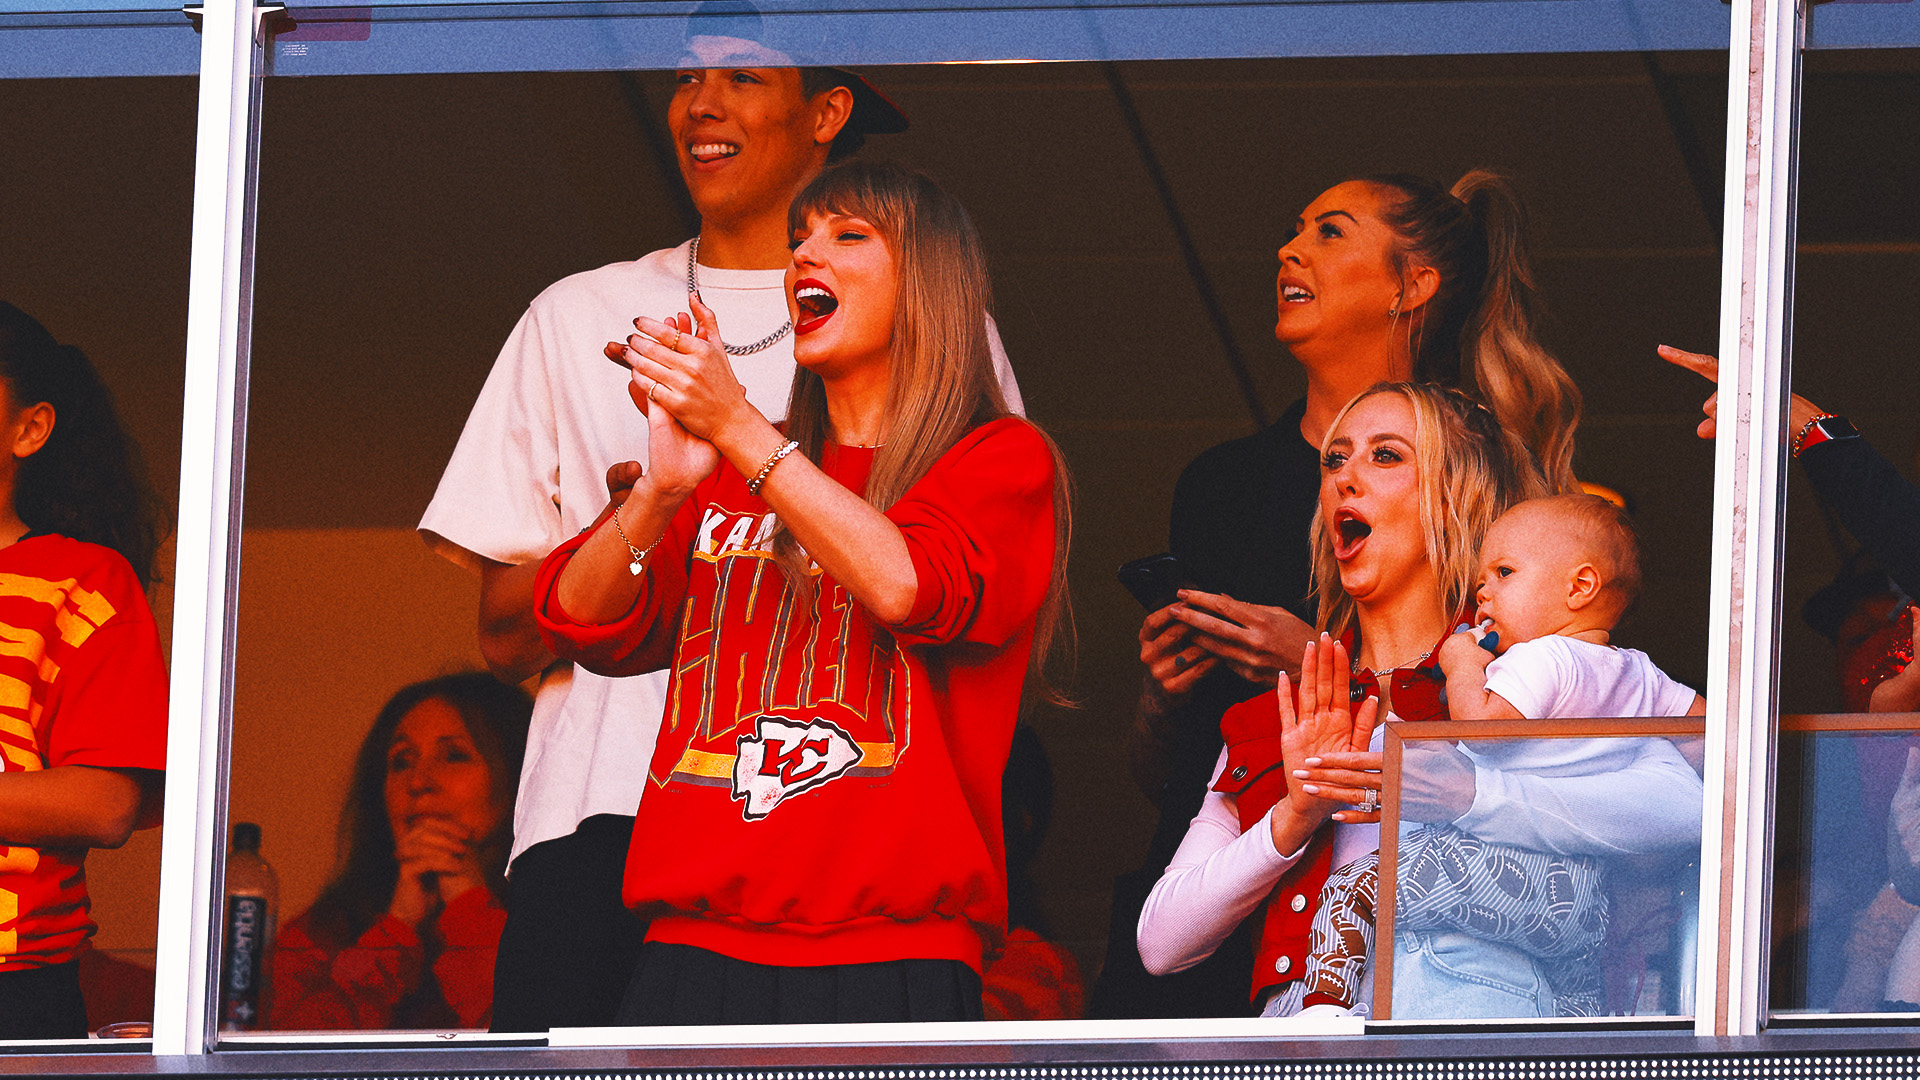 Report: Taylor Swift hosted watch party for Chiefs significant others Sunday